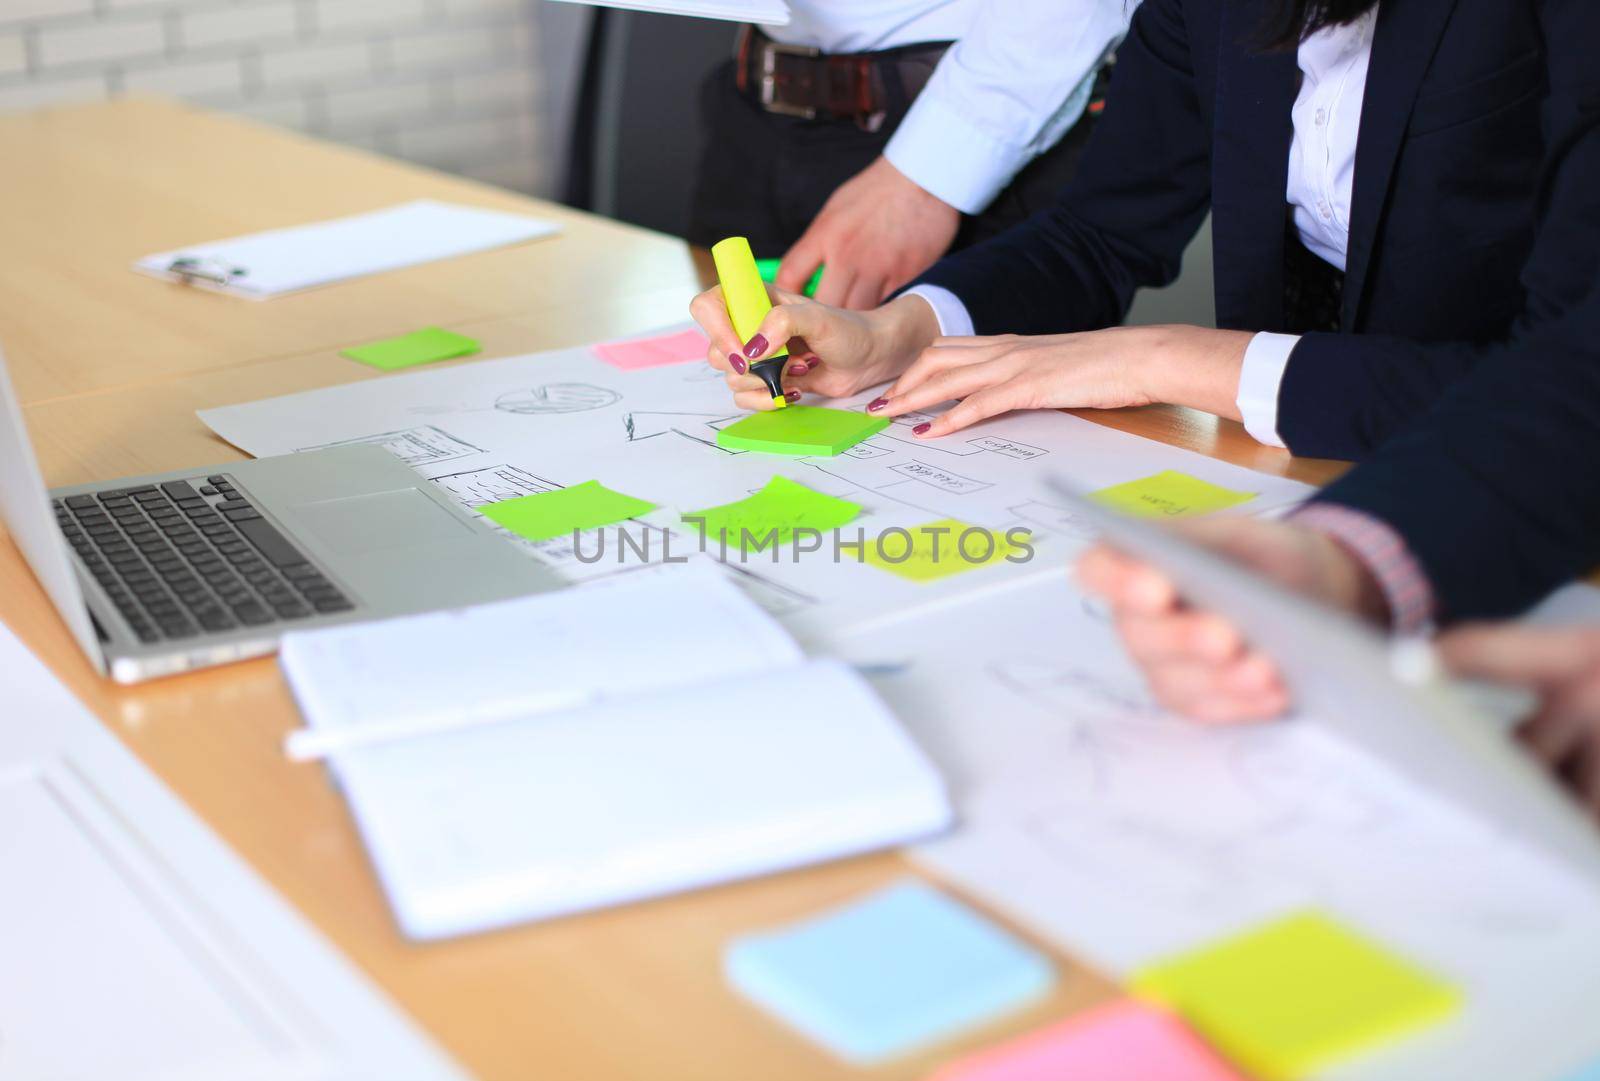 Image of business people hands working with papers at meeting